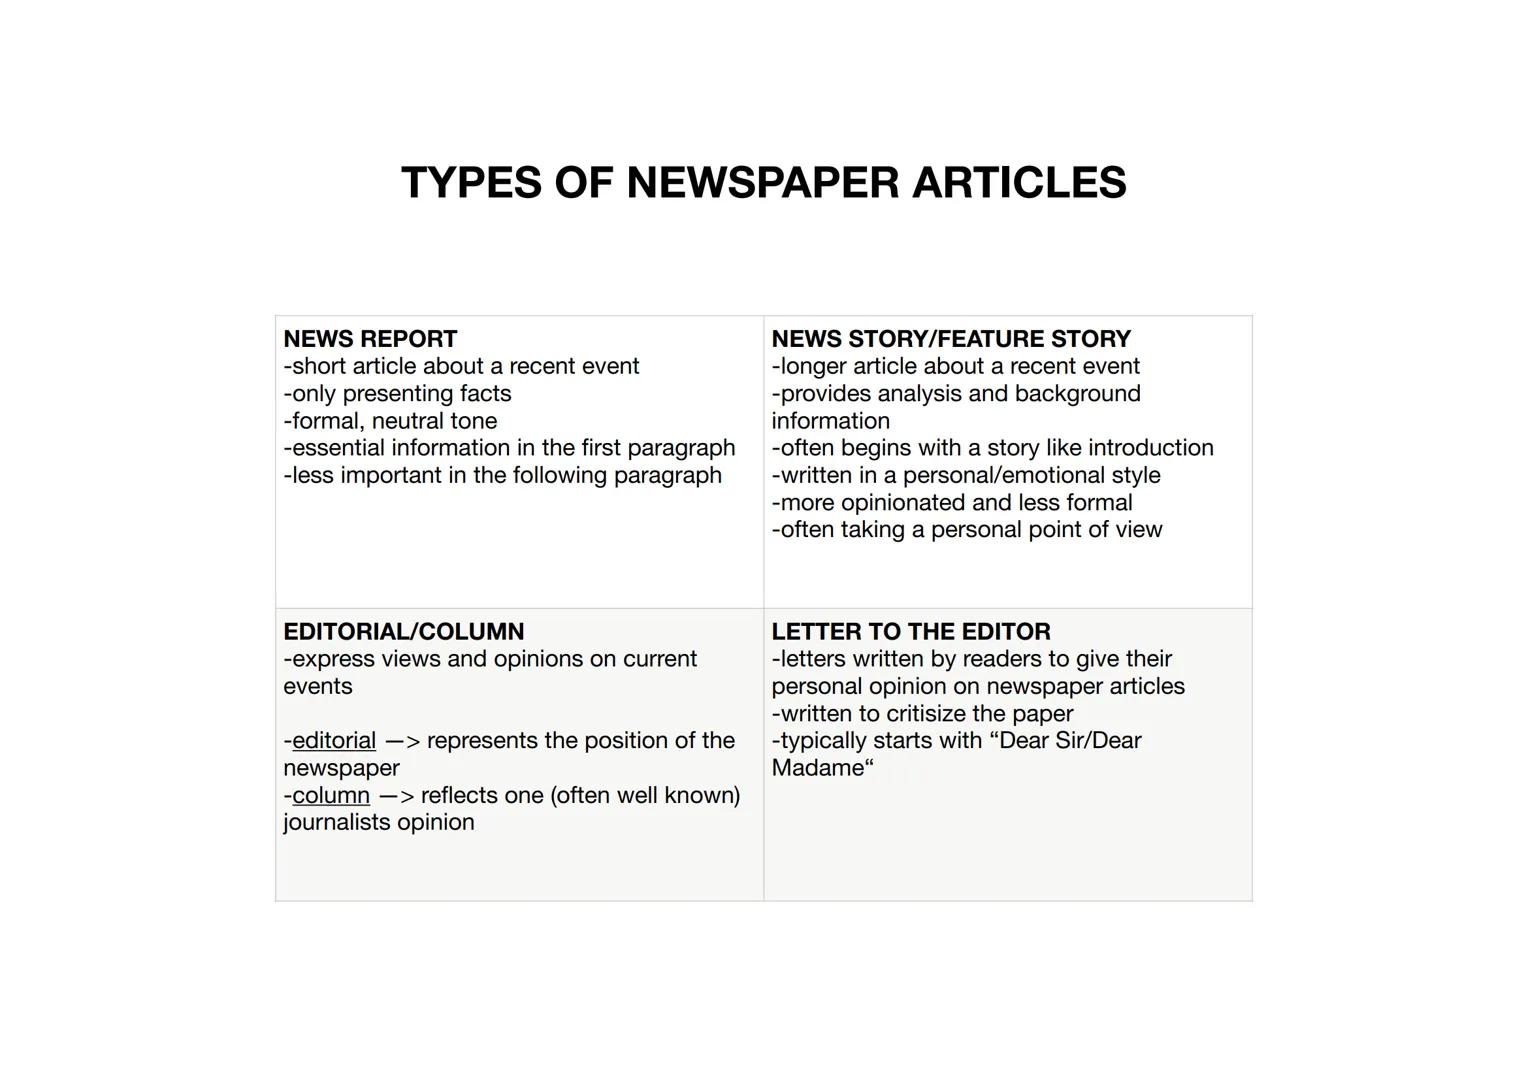 TYPES OF NEWSPAPER ARTICLES
NEWS REPORT
-short article about a recent event
-only presenting facts
-formal, neutral tone
-essential informat